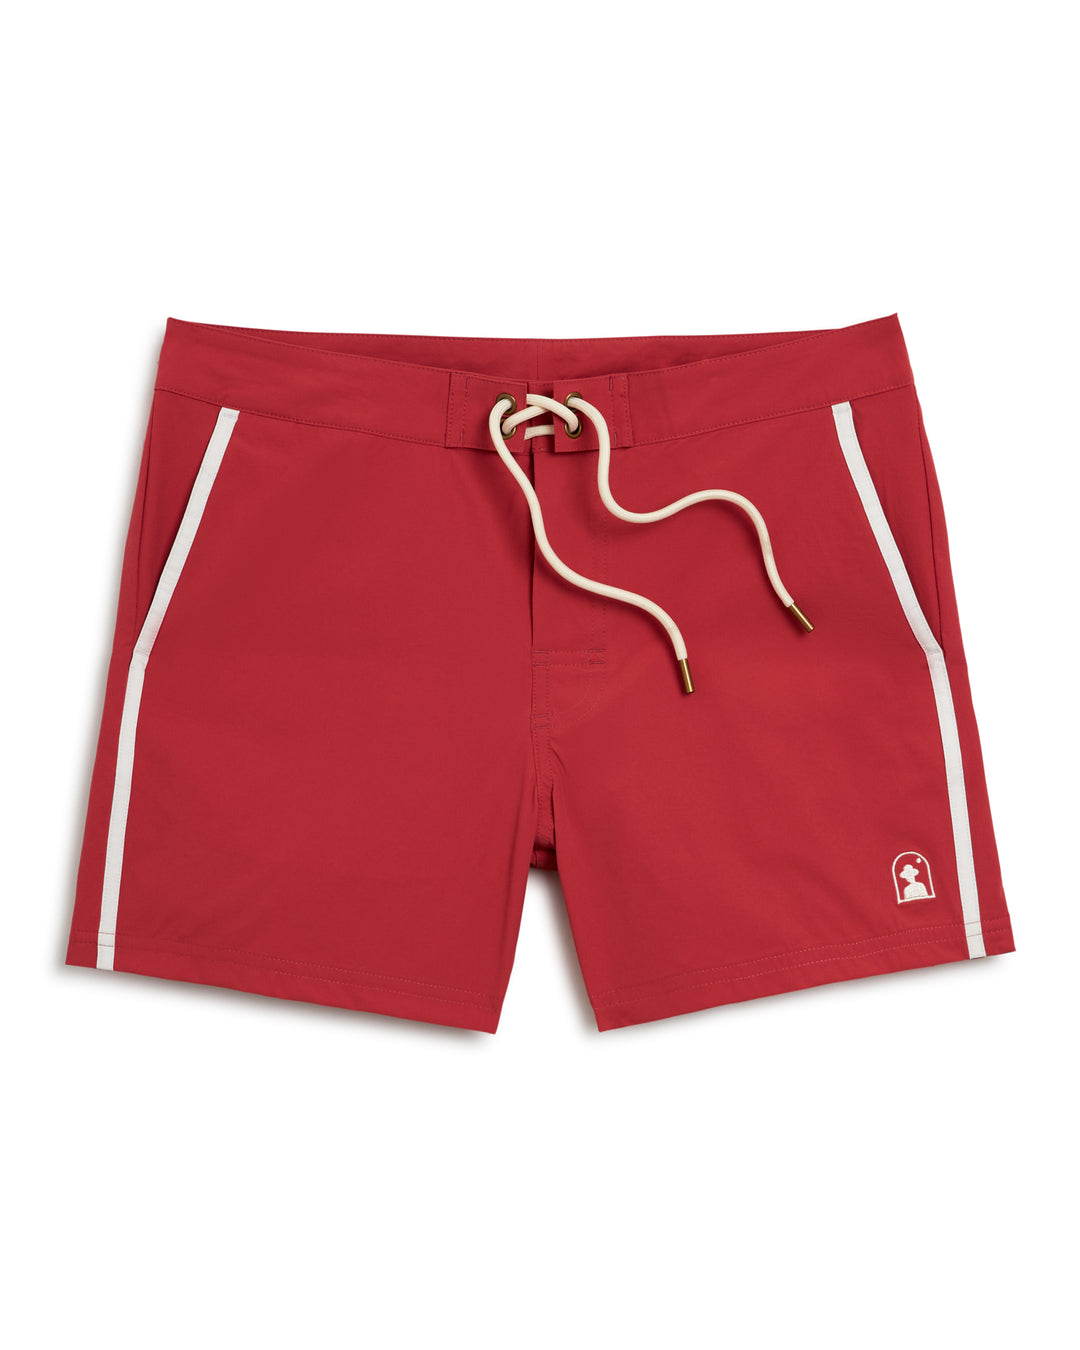 The Stirata Swim Short - Currant by Dandy Del Mar - Water-resistant swim trunk for men with a 4-way stretch.